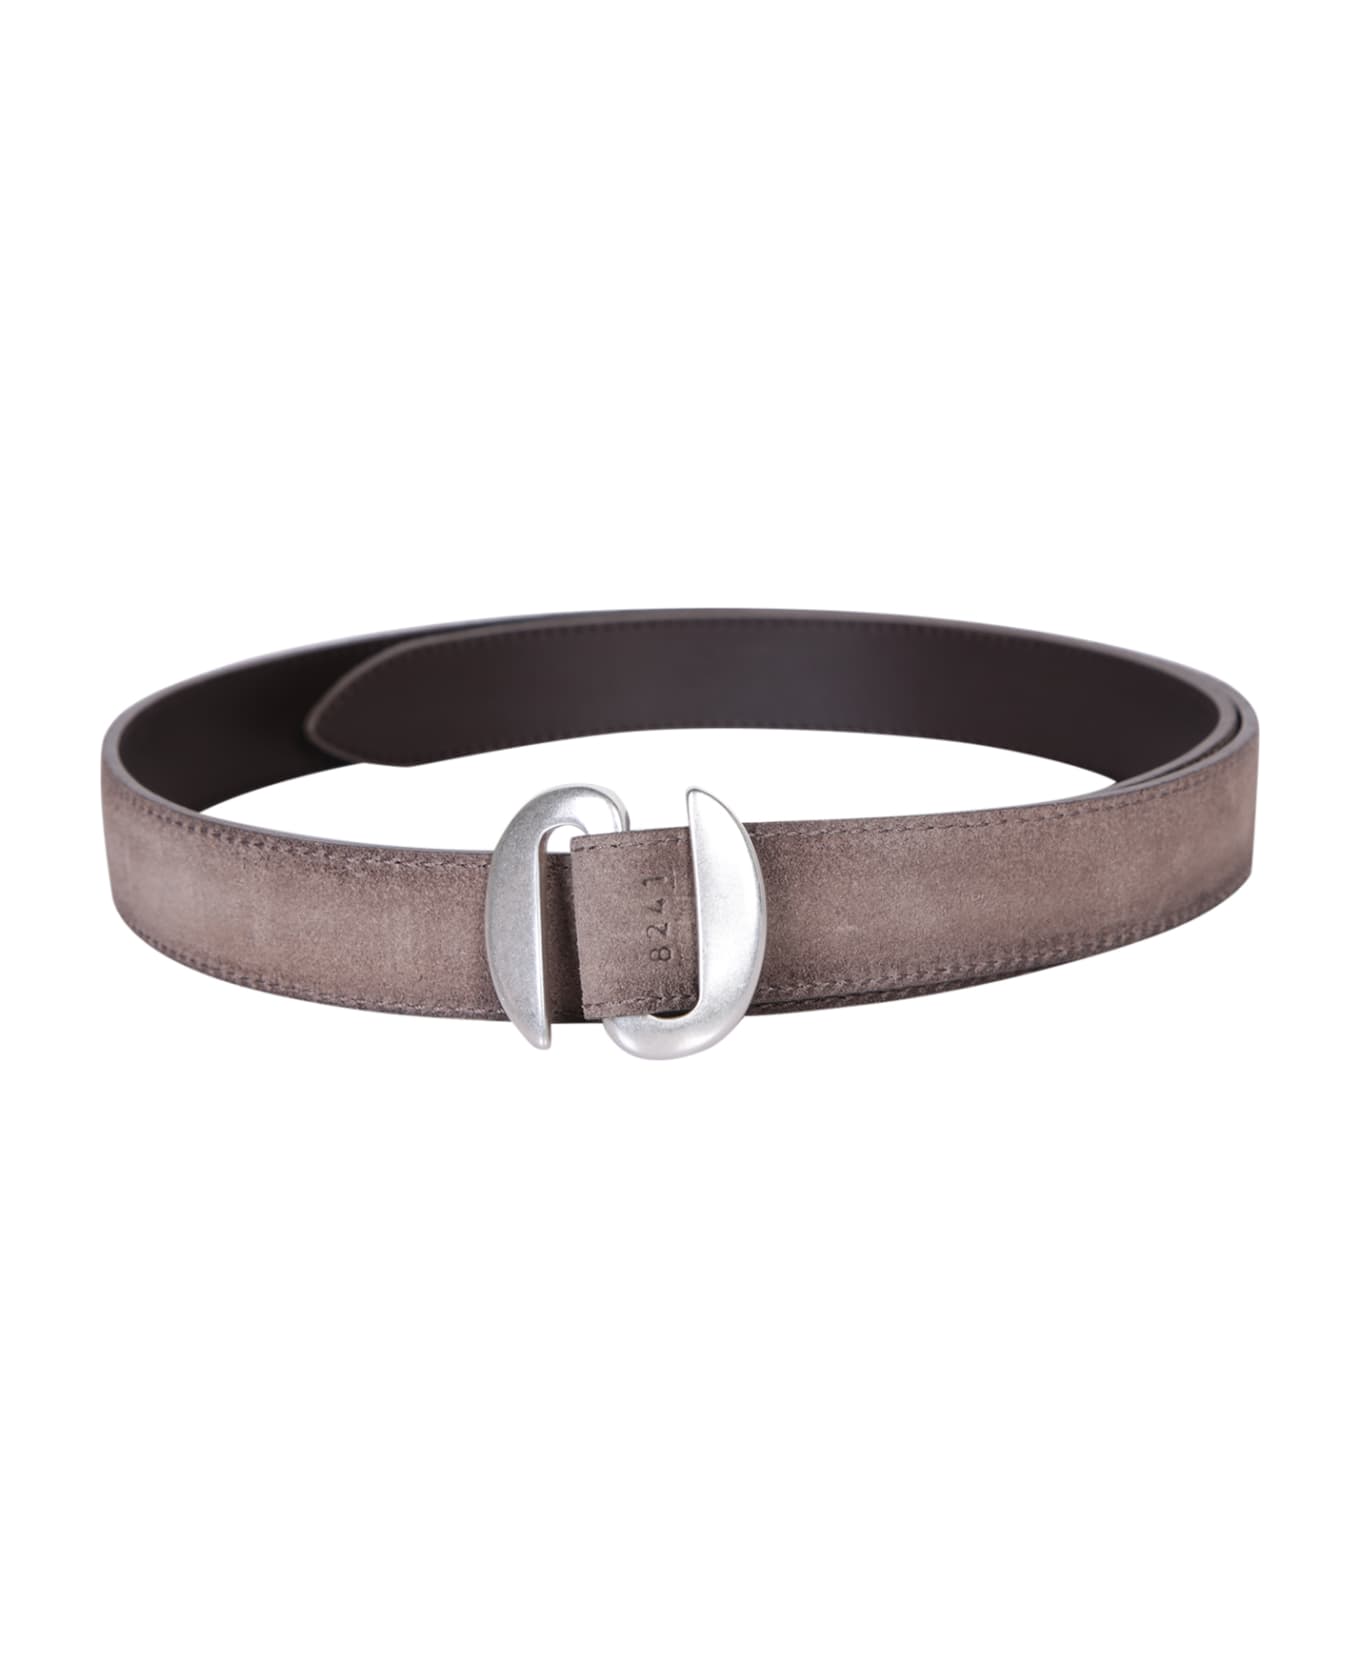 Orciani Reversible Taupe Belt - Beige